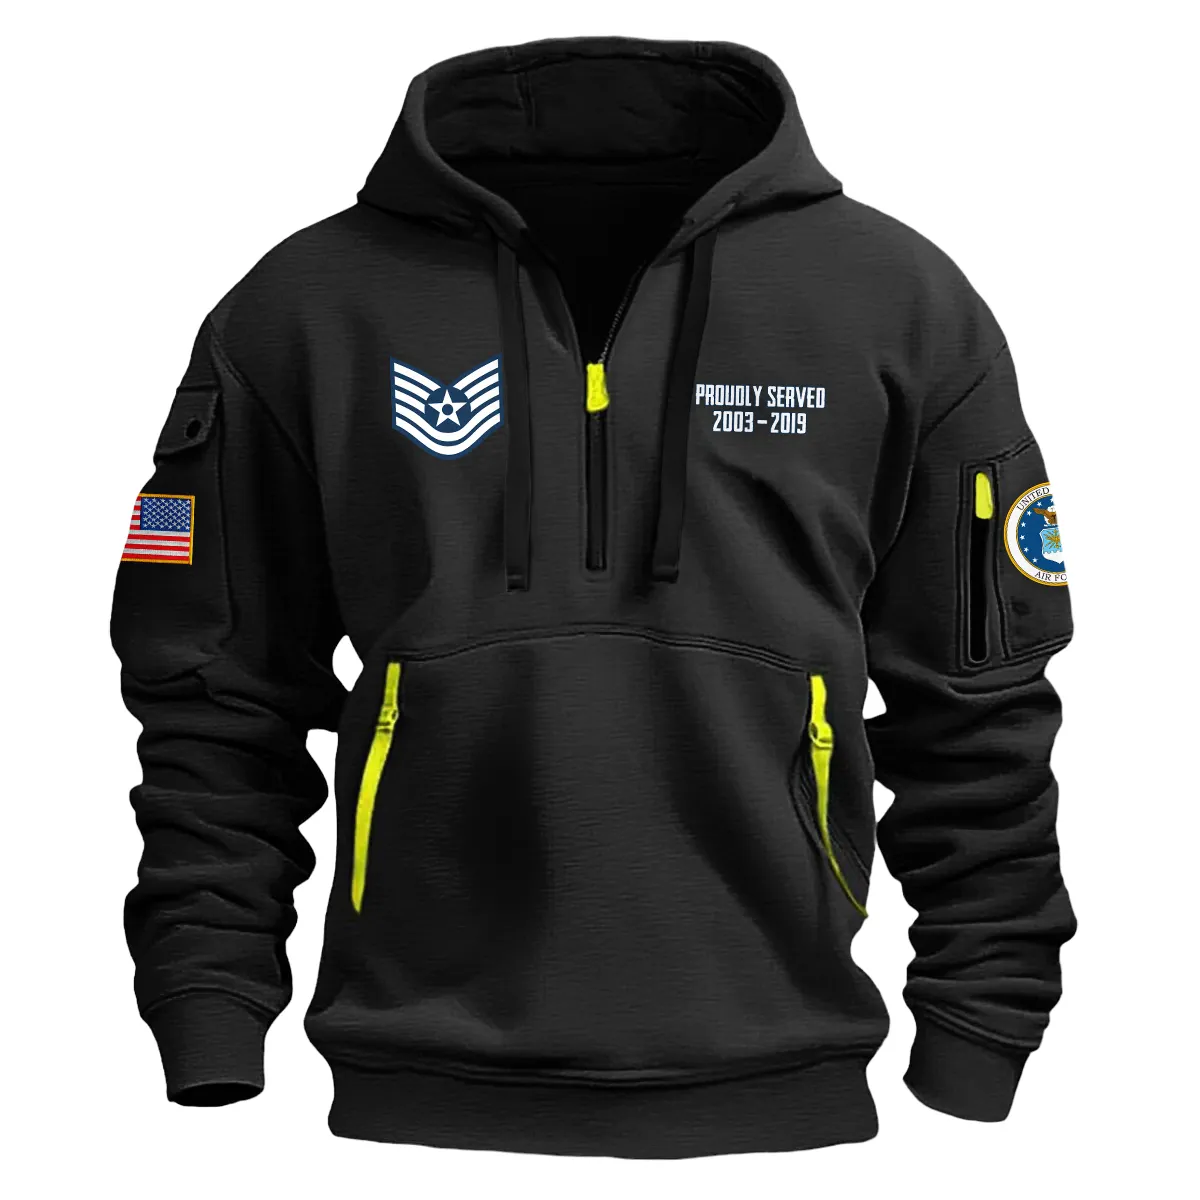 US Military All Branches! Personalized Gift E3-A1C U.S. Air Force Fashion Hoodie Half Zipper